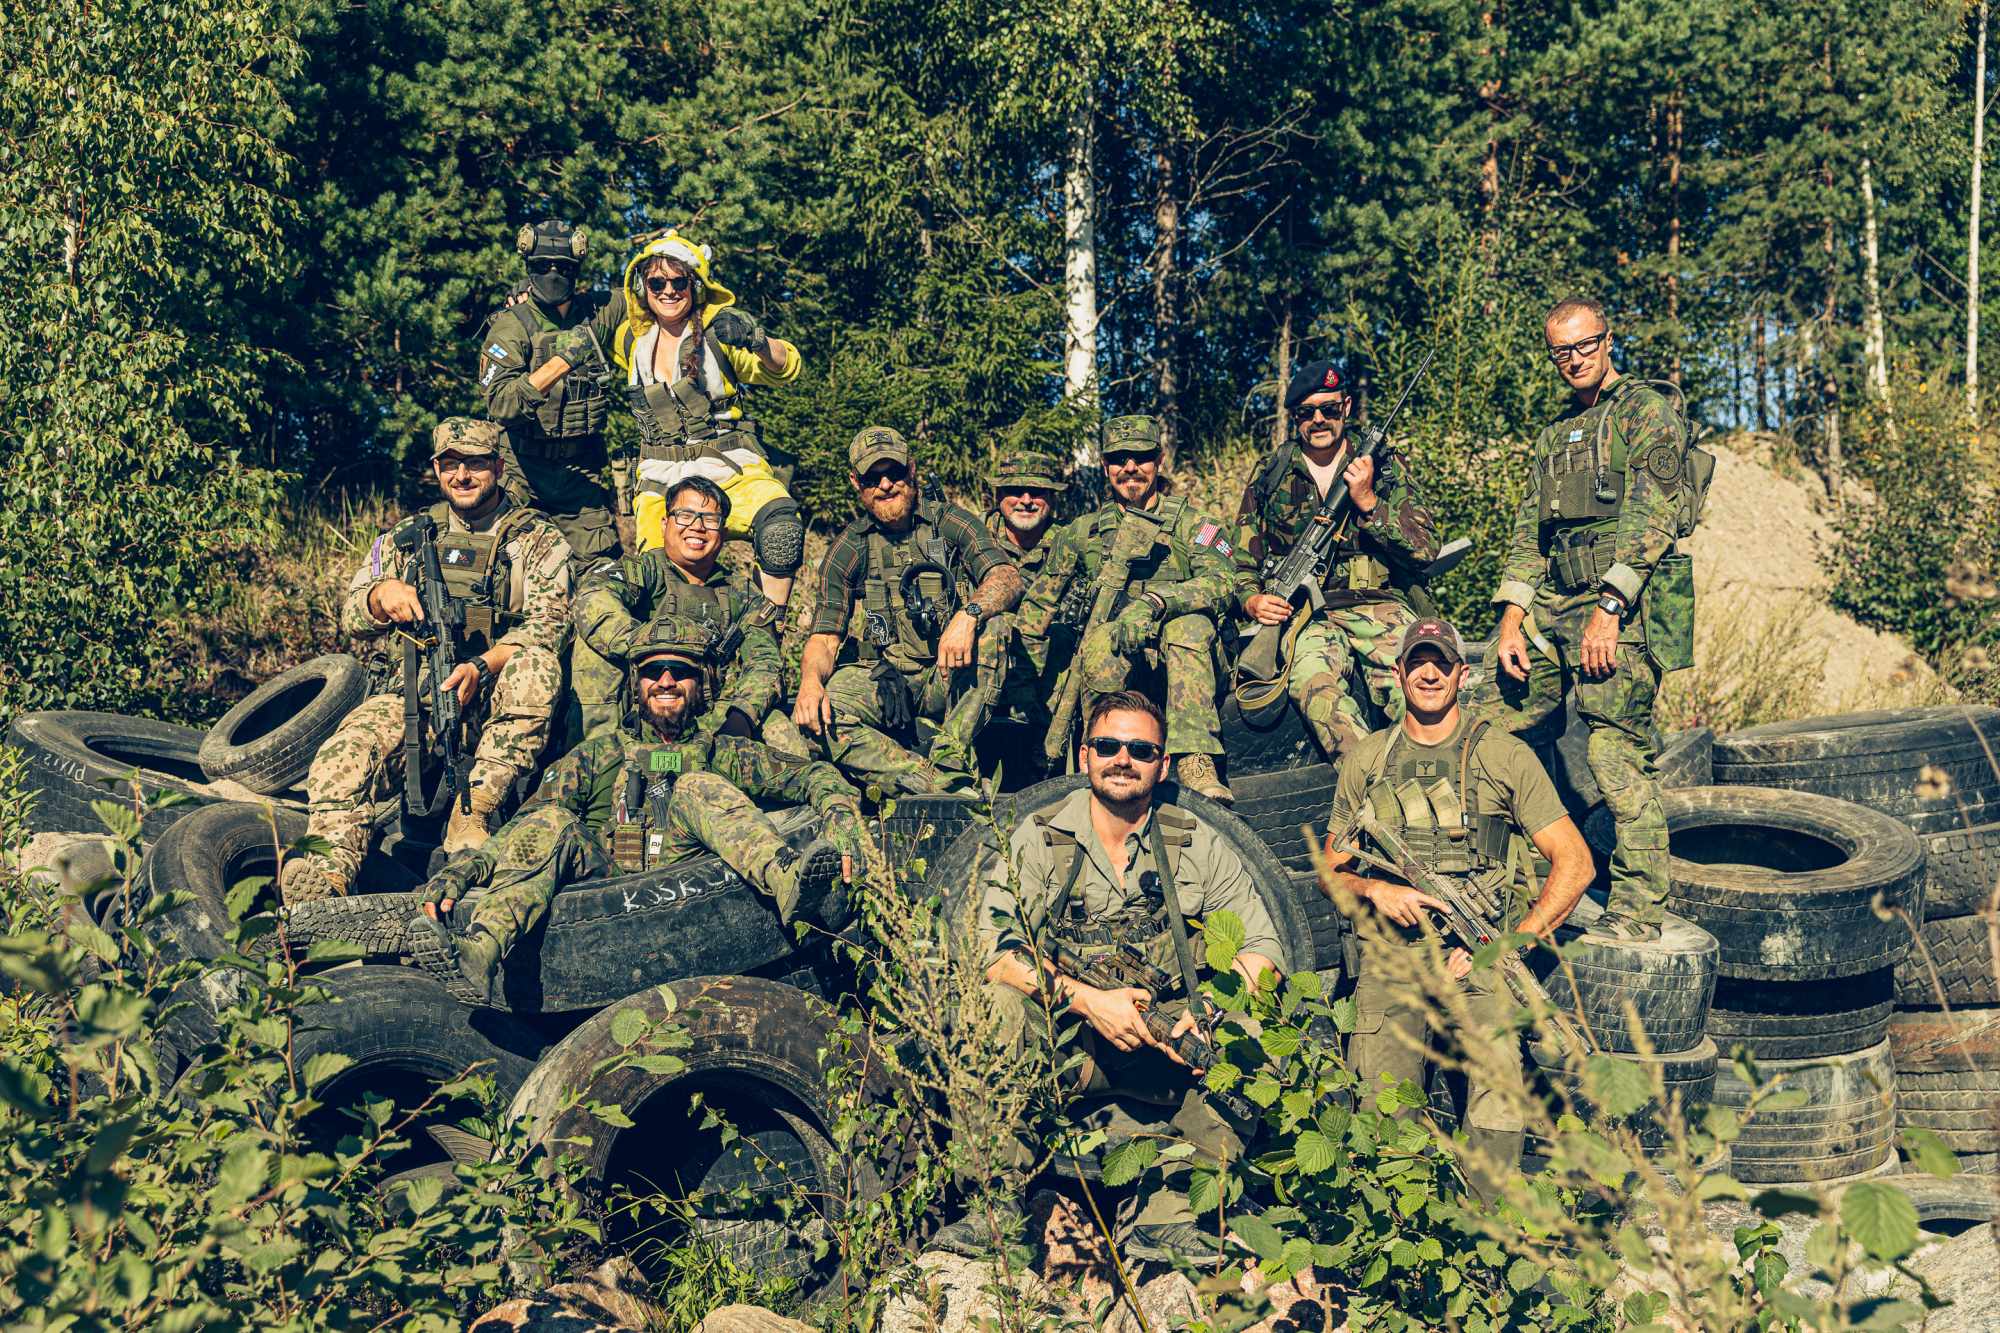 People in camo clothing gathered together to pose for the camera in front of a forest..